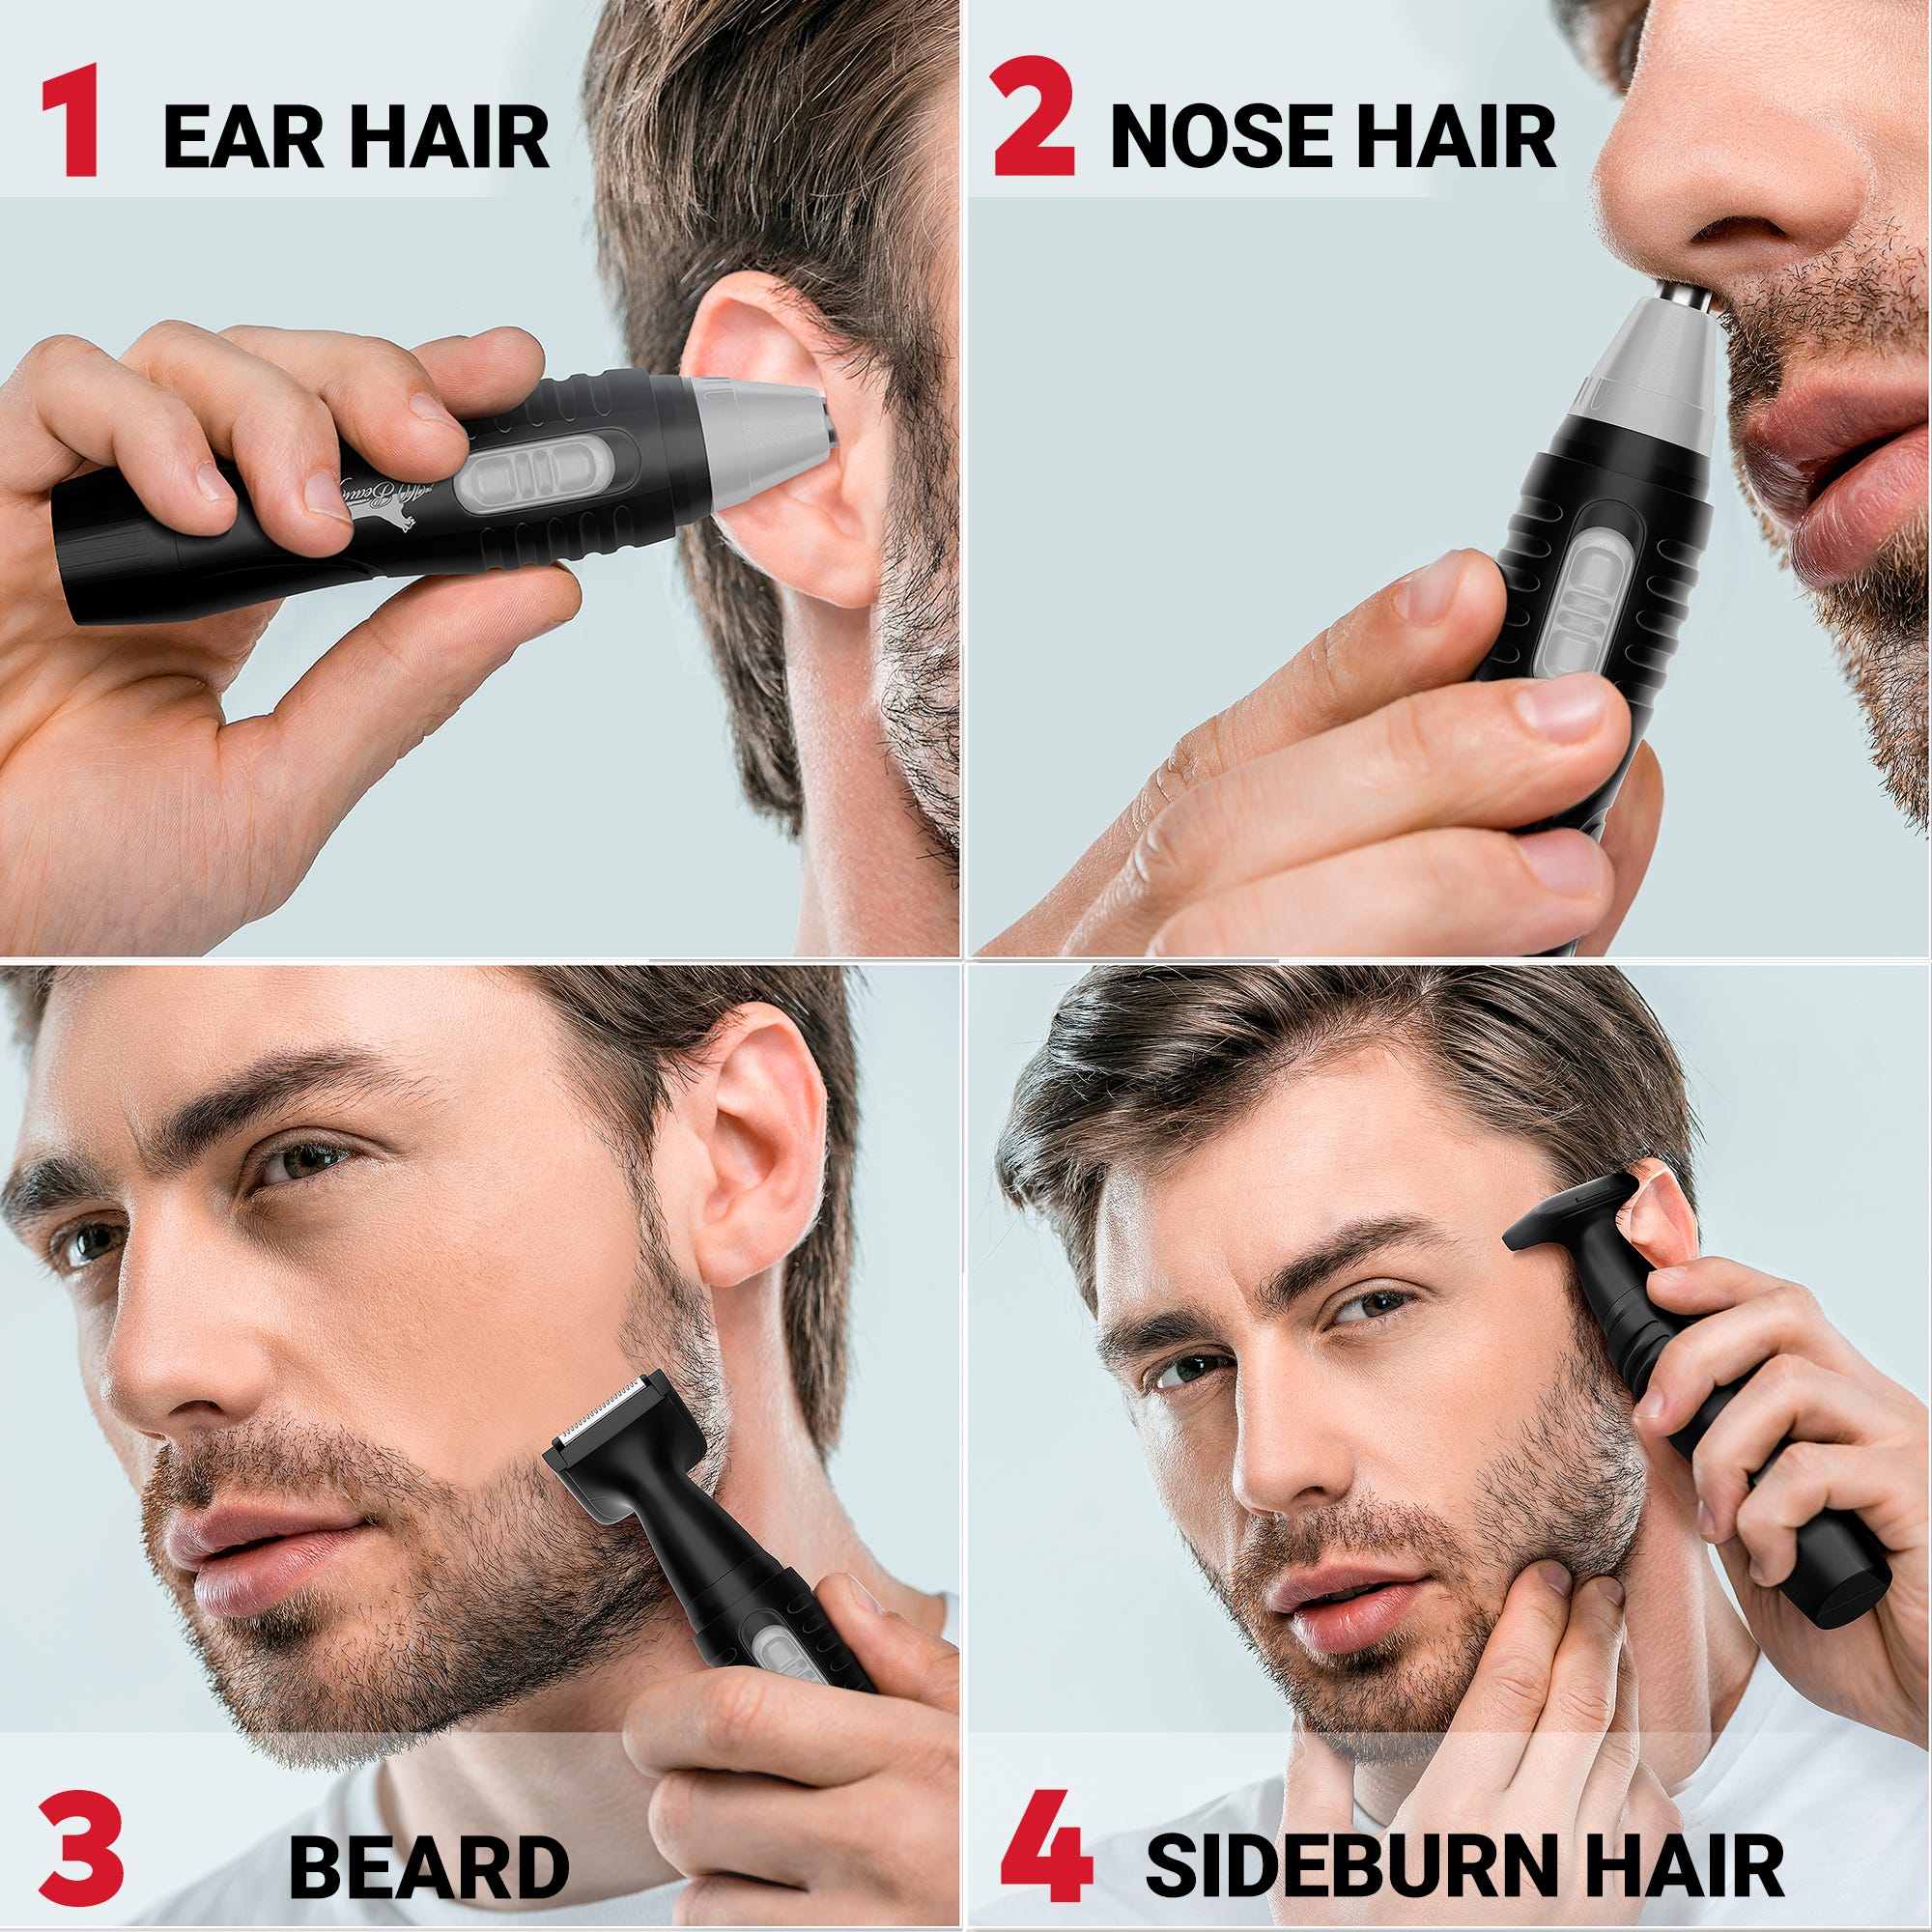 how to trim nose hair with electric trimmer